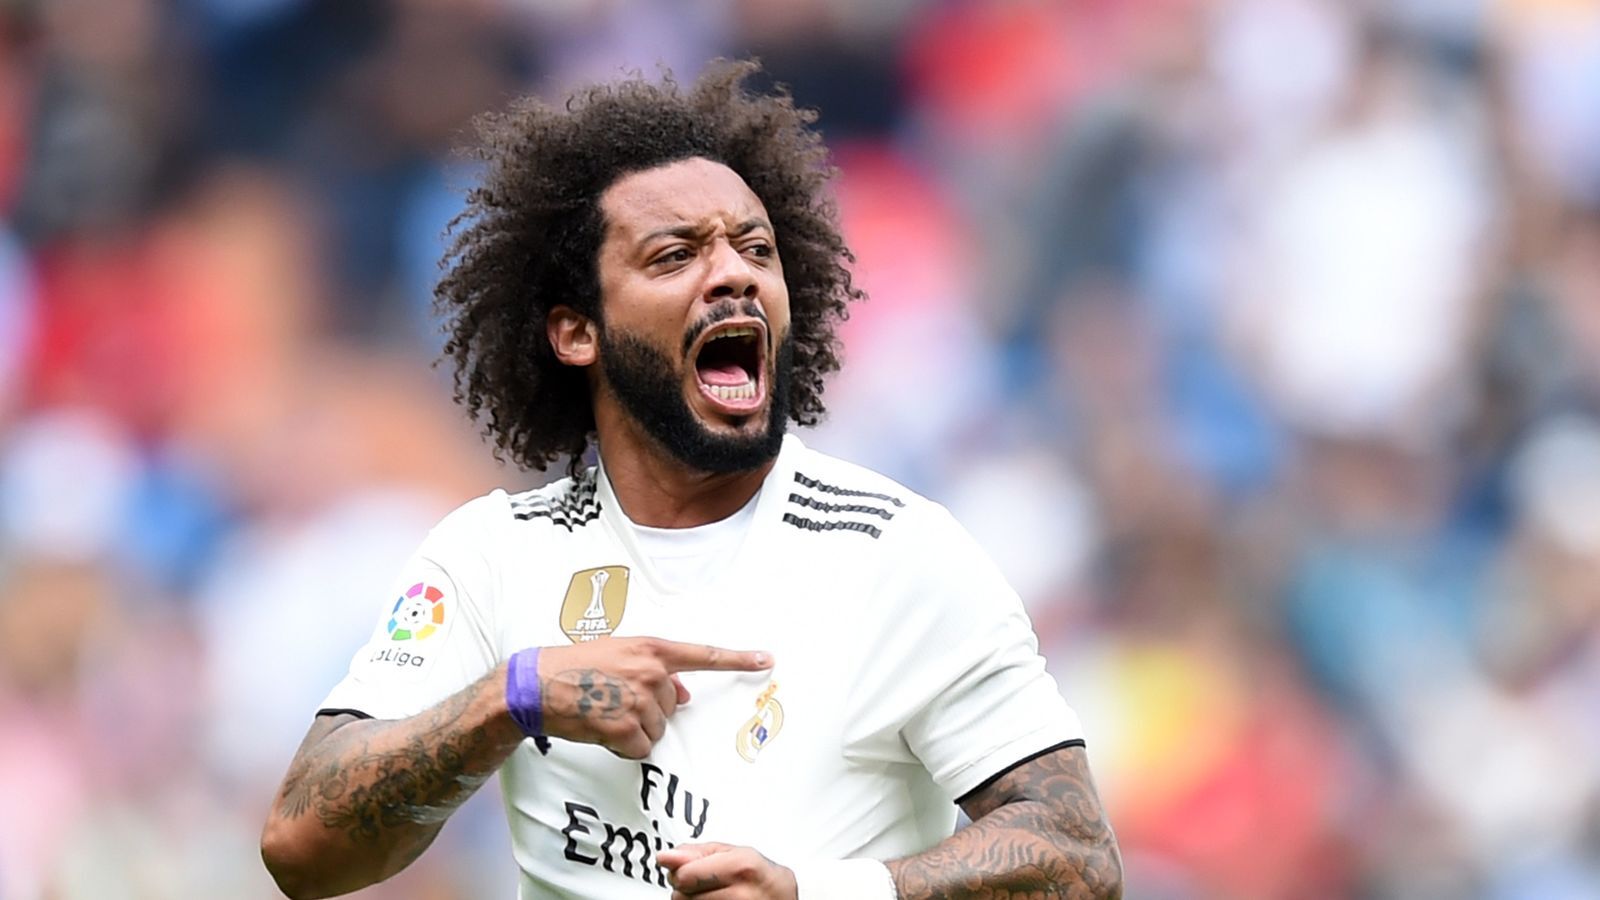 Marcelo Kneels to Support BLM Movement after Scoring a Goal for Real Madrid